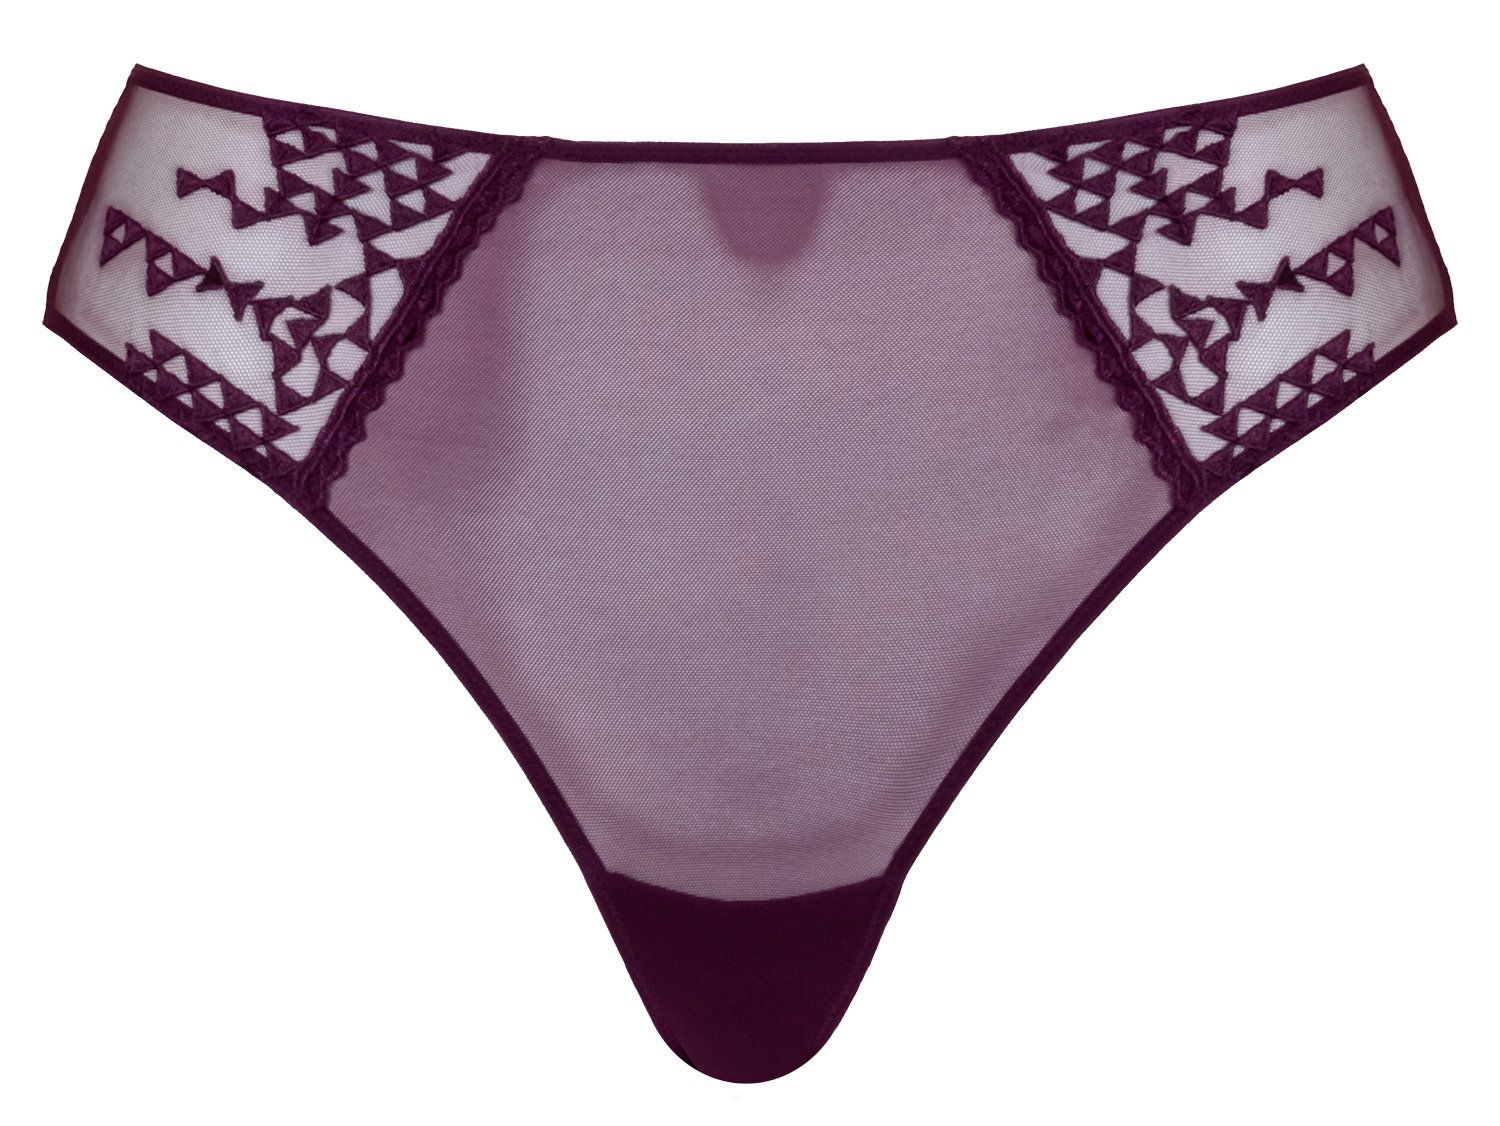 https://www.lumingerie.com/images/products/centre-stage-ck033207-deep-thong-fig-f-cutout_orig.jpg